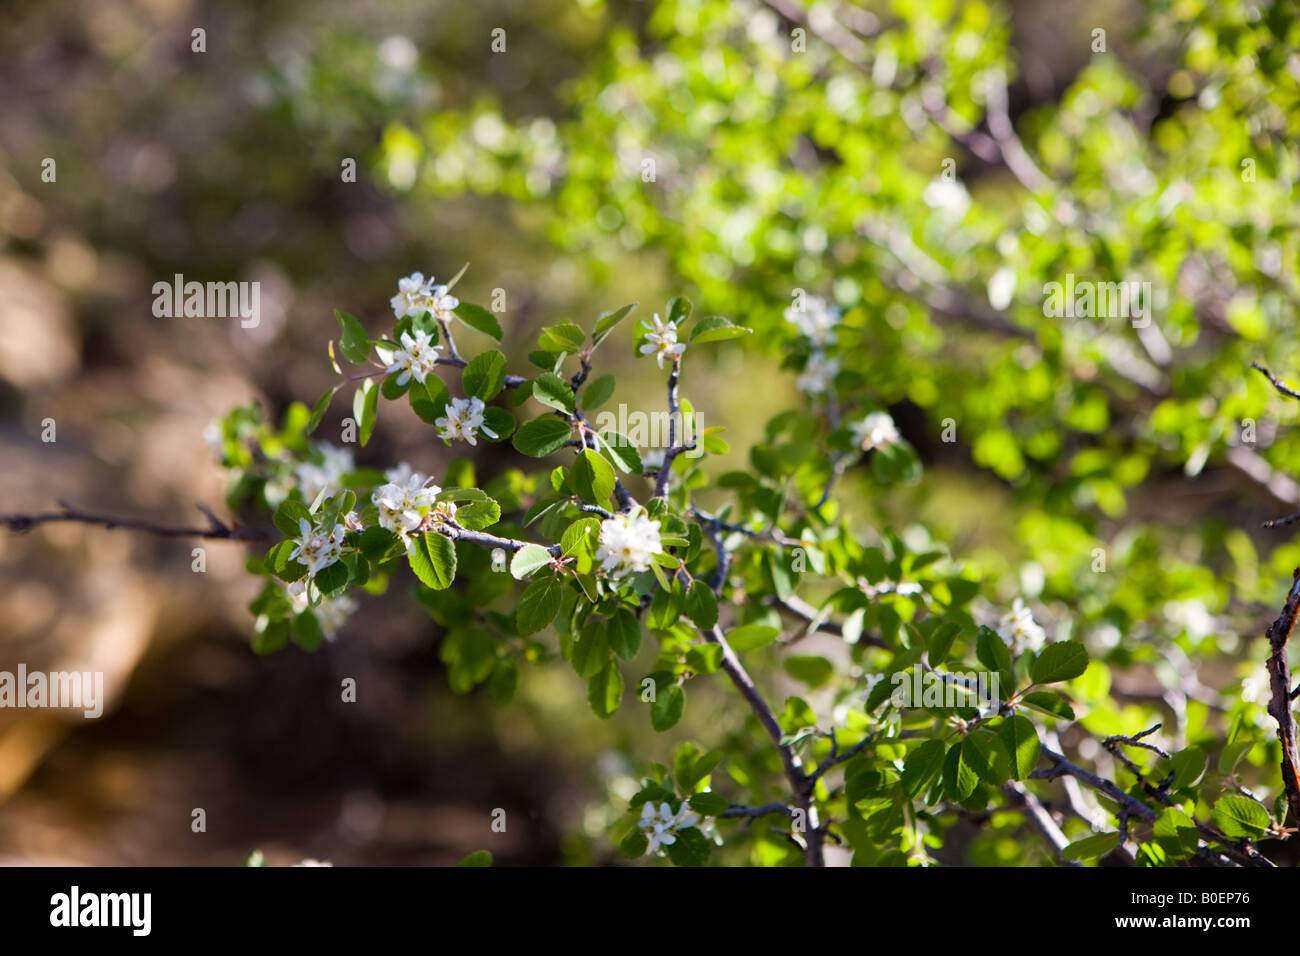 Utah serviceberry Amelanchier utahensis with white flowers and green leaves Mesa Verde National Park near Cortez Colorado Stock Photo